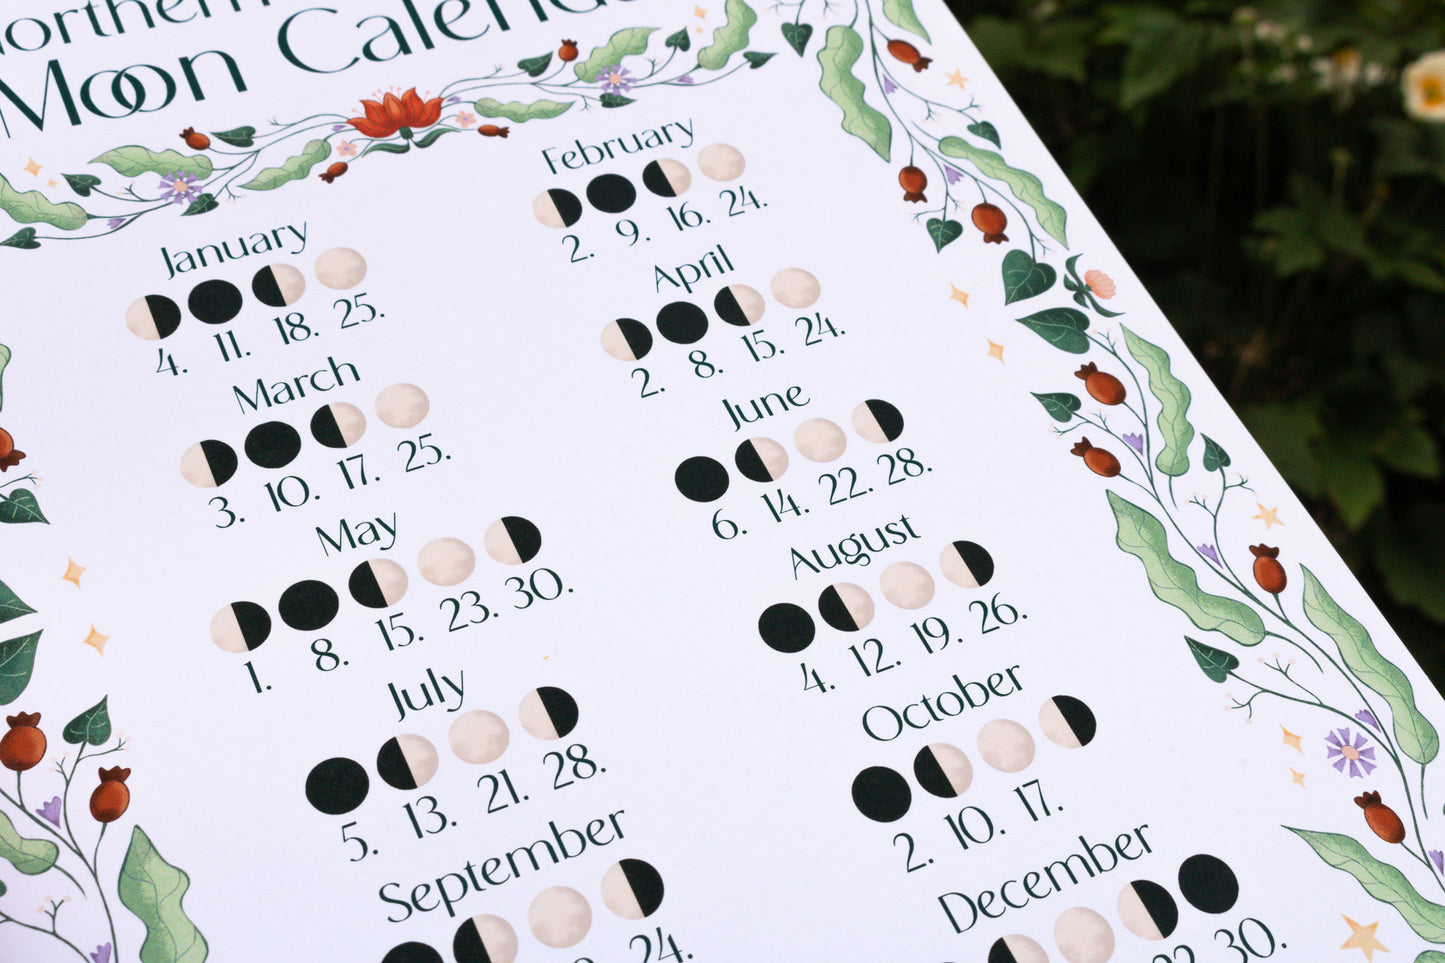 2024 Moon Calendar Northern Hemisphere with illustrated floral design by Mellow Apricot Studio - close up